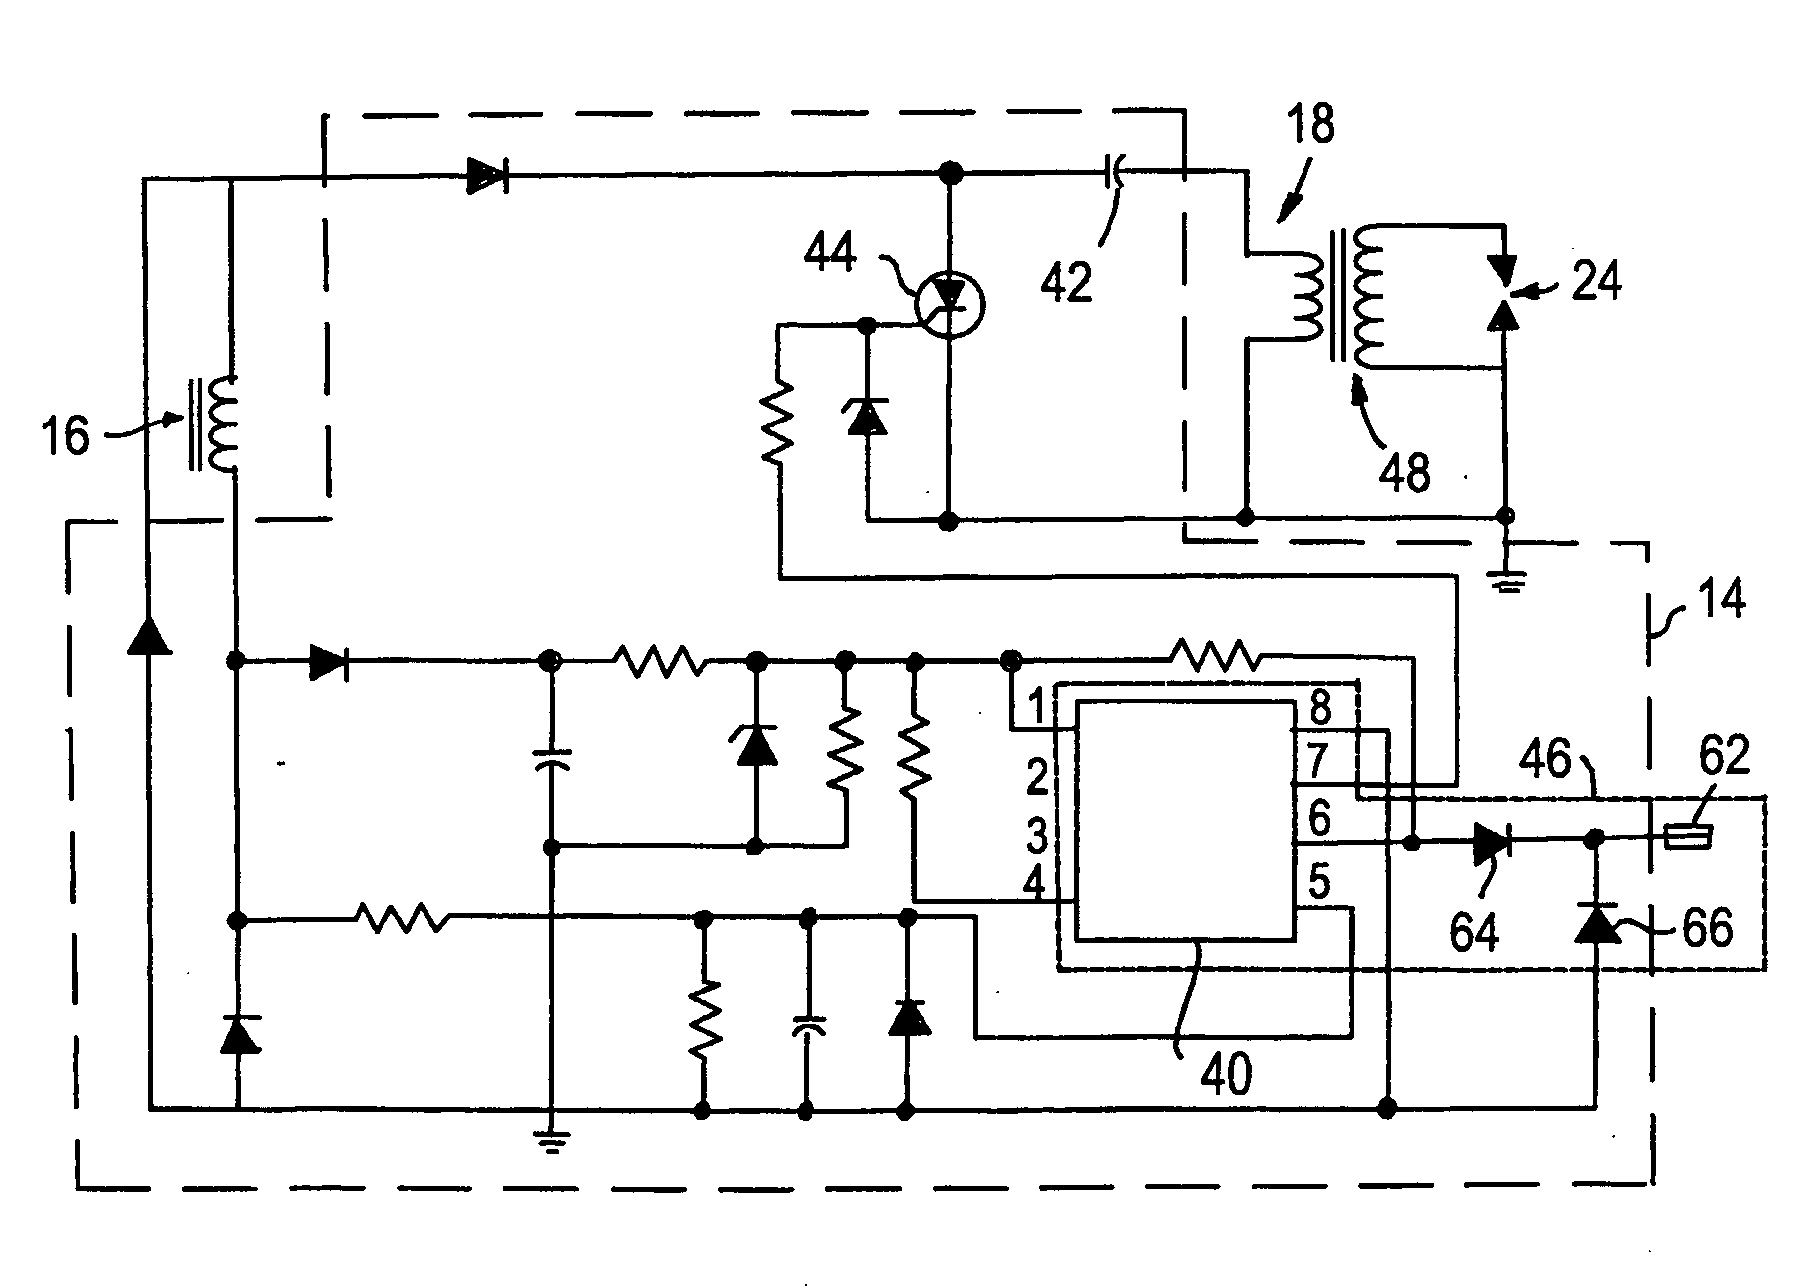 Engine kill-switch control circuit and method of operating the same